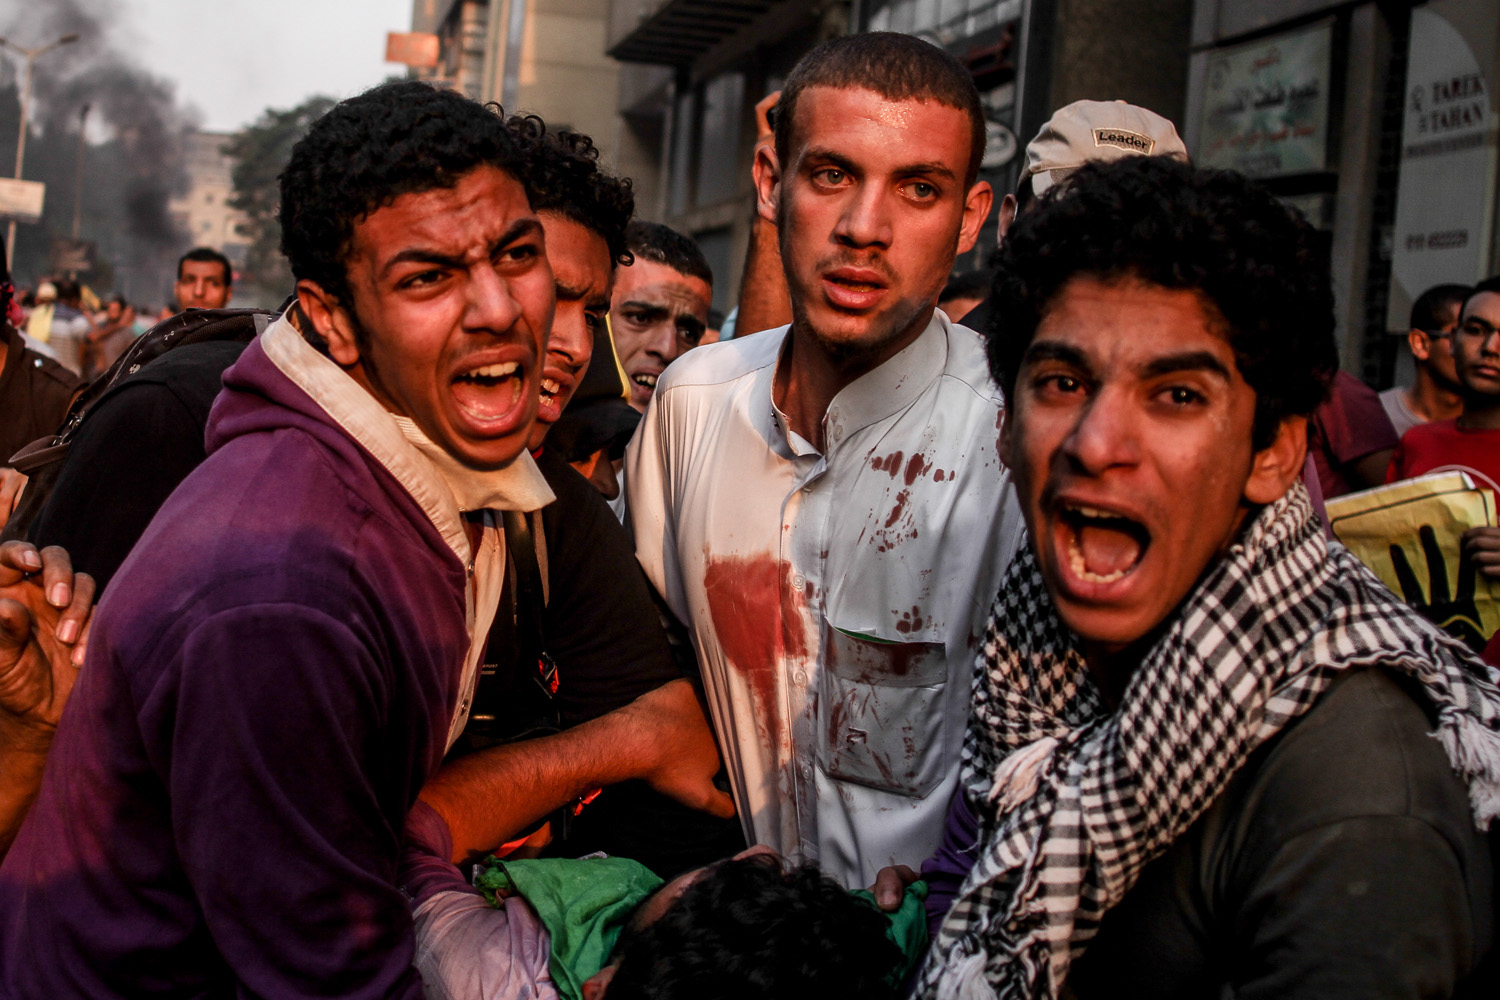 Oct. 6, 2013. An injured Egyptian supporter of ousted President Morsi is assisted during clashes on the day the country celebrates the 40th anniversary of the 1973 Arab-Israeli war, in the Dokki area of Giza, near Cairo.